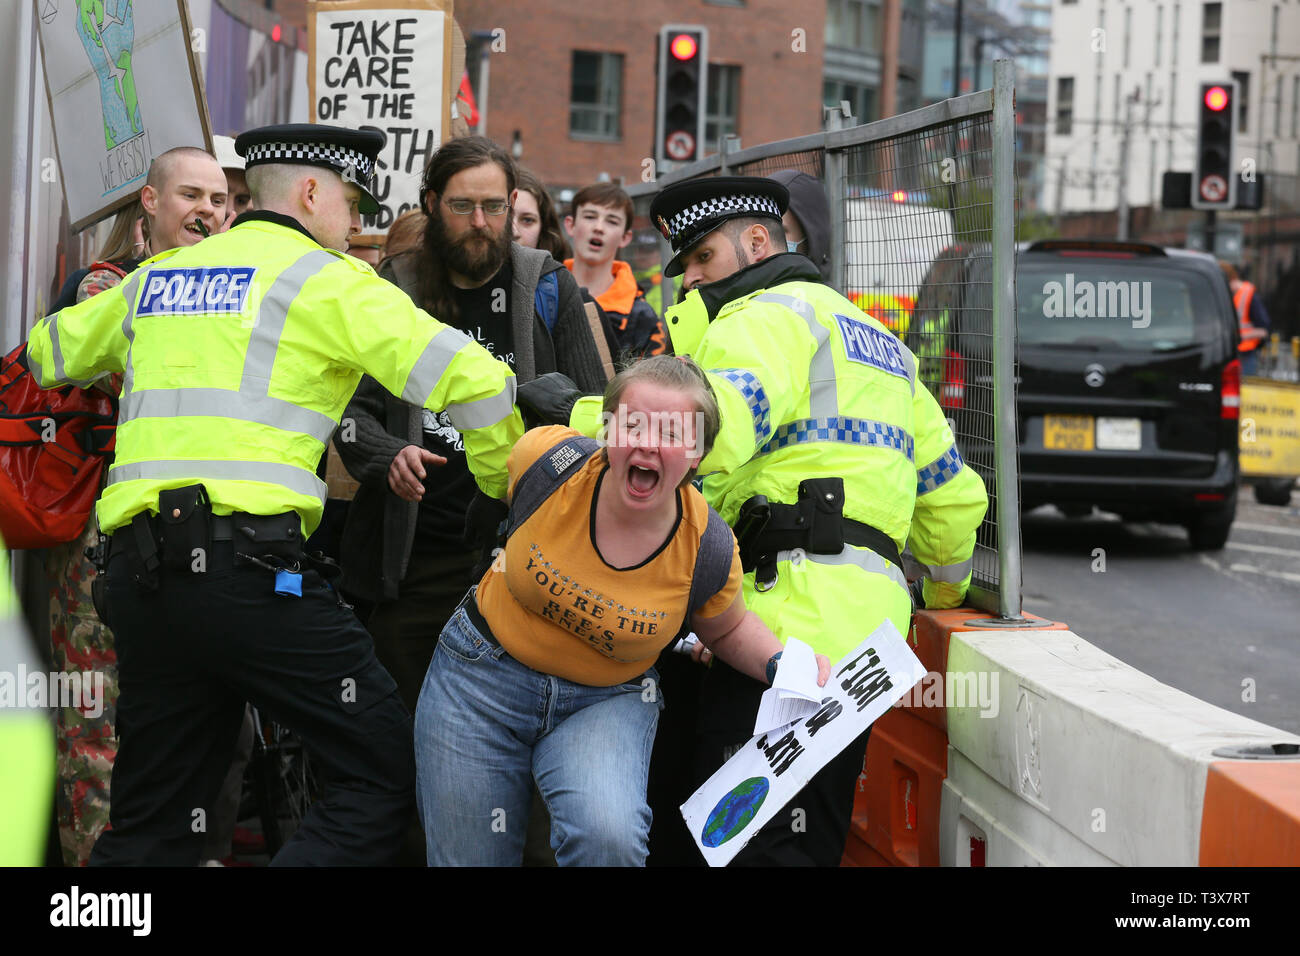 Manchester, UK. 12th Apr 2019. Police Officers use a passageway to block protesters from continuing with climate change action. A young girl panicked and broke away from officers, Manchester, UK, 12th April 2019 Credit: Barbara Cook/Alamy Live News Stock Photo